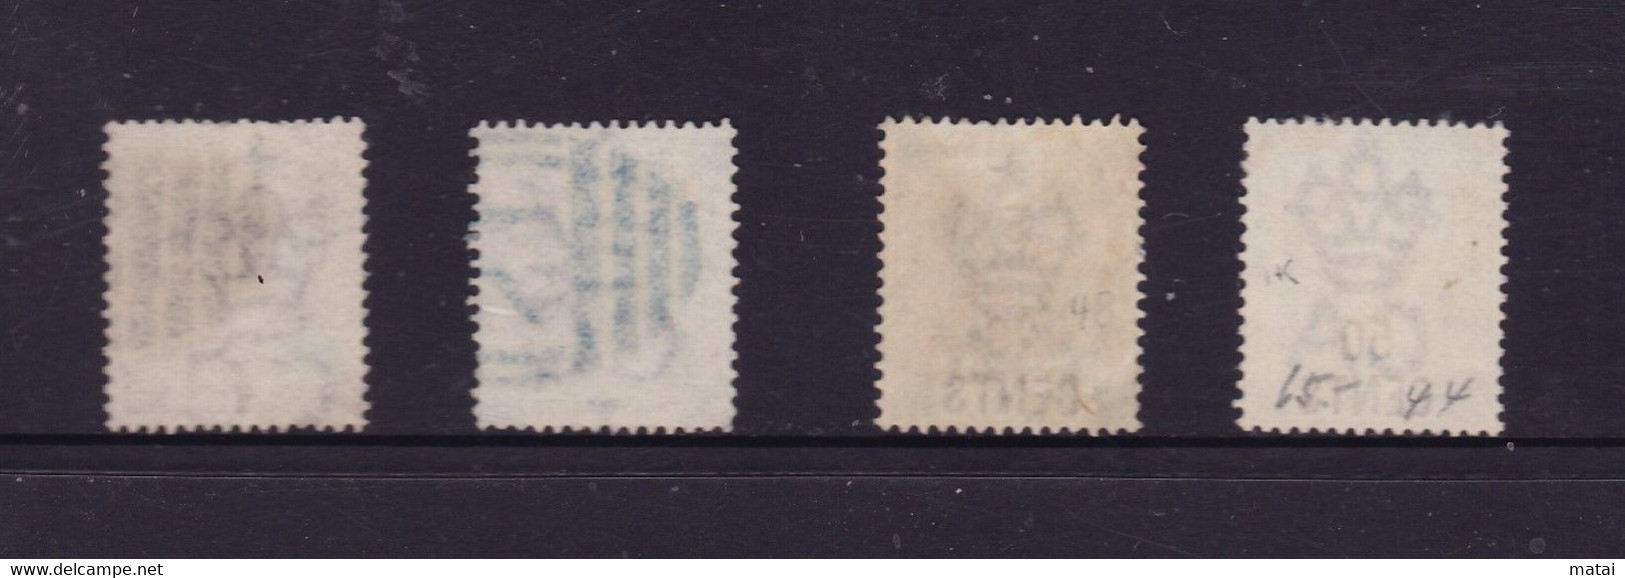 HONG KONG 2 C. + 12 C. ，  20 CENTS On 30 C, 50 CENTS On 48 C., Both Cancelled, Vf, Ovpr. With Chinese Caracters Also - 1941-45 Japanisch Besetzung